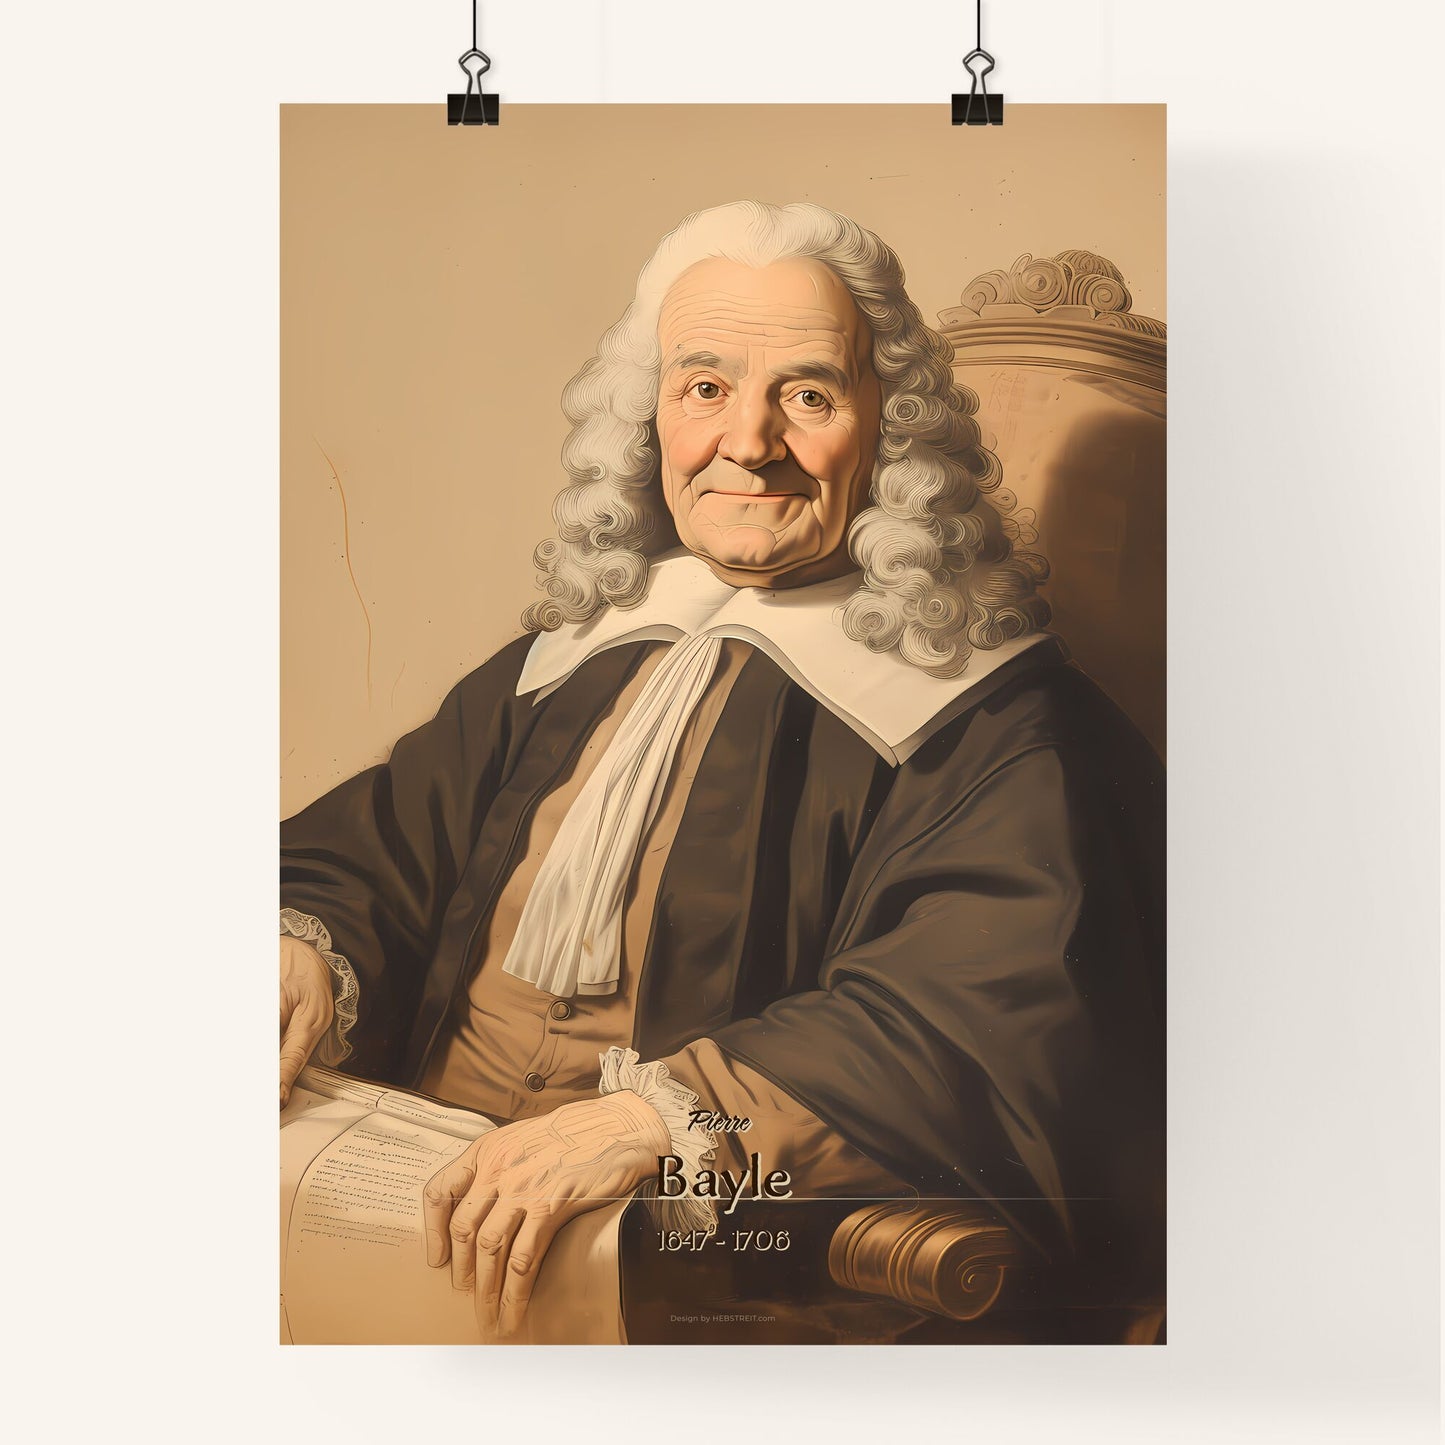 Pierre, Bayle, 1647 - 1706, A Poster of a man with white curly hair wearing a black robe and brown pants Default Title